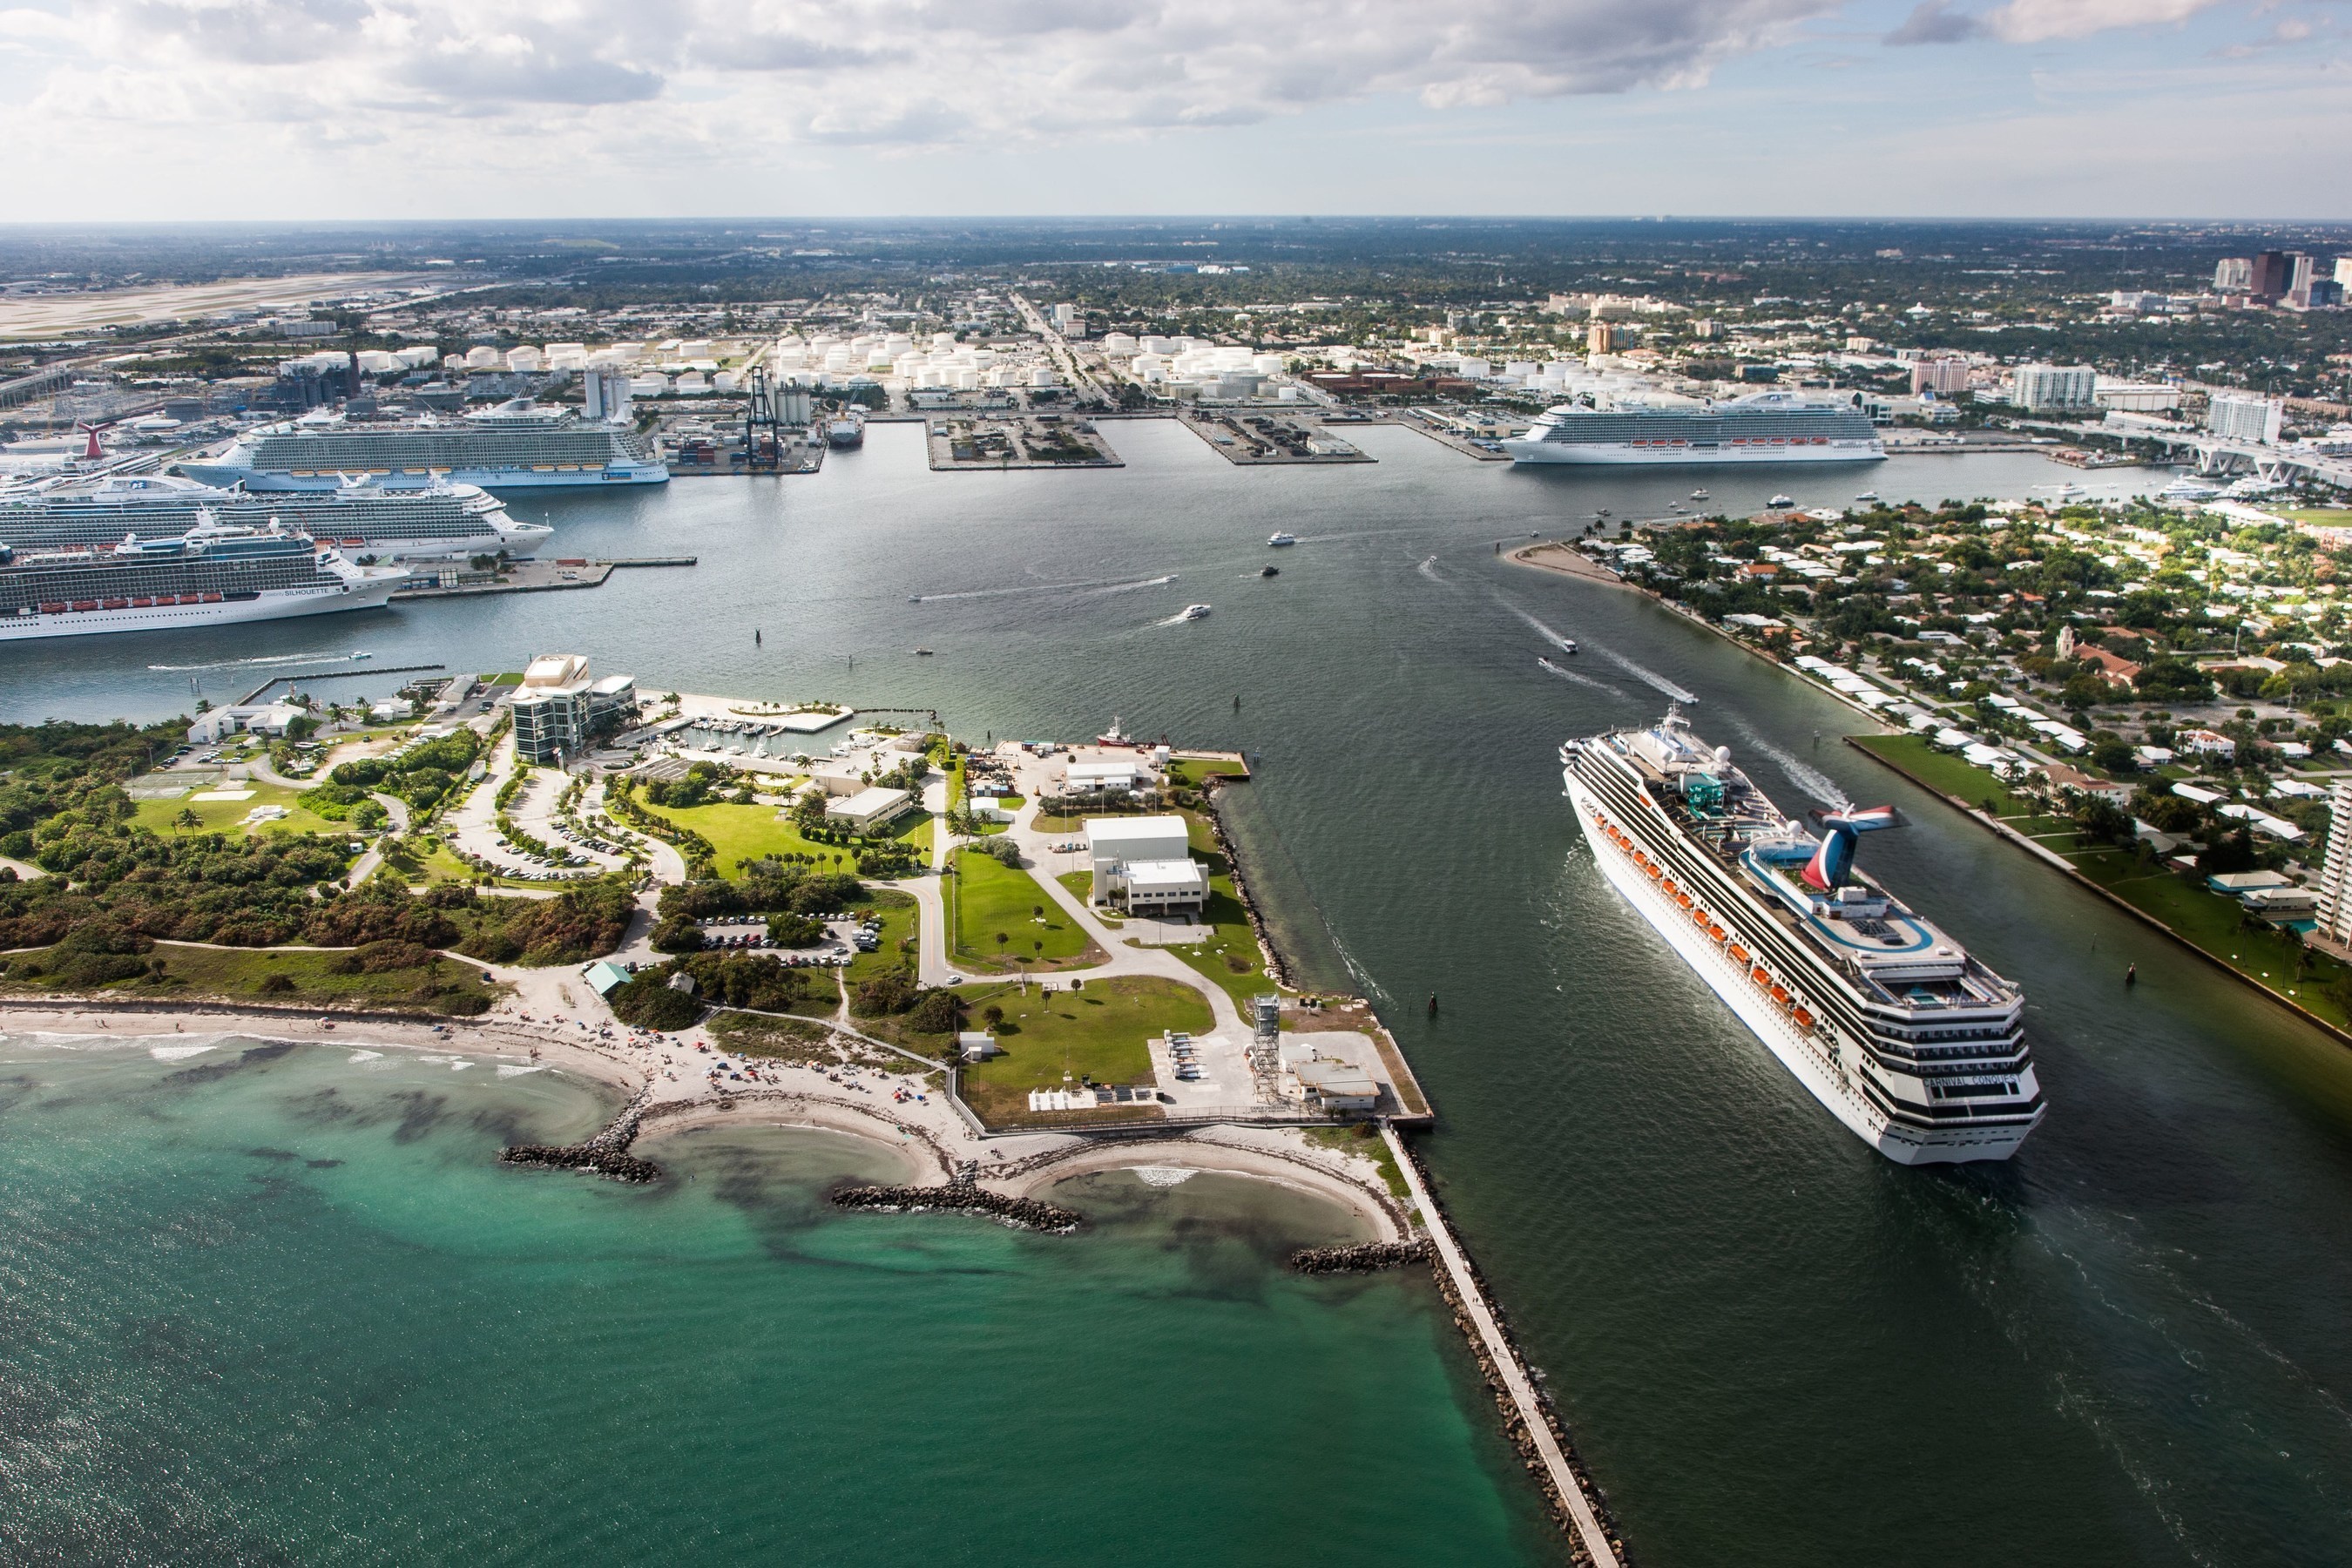 Carnival Corporation signed an addendum to one of its most strategic passenger terminal agreements, extending the contract through 2030 with an additional five years of sailings to and from Fort Lauderdale-based Port Everglades, one of the world's top three cruise ports.